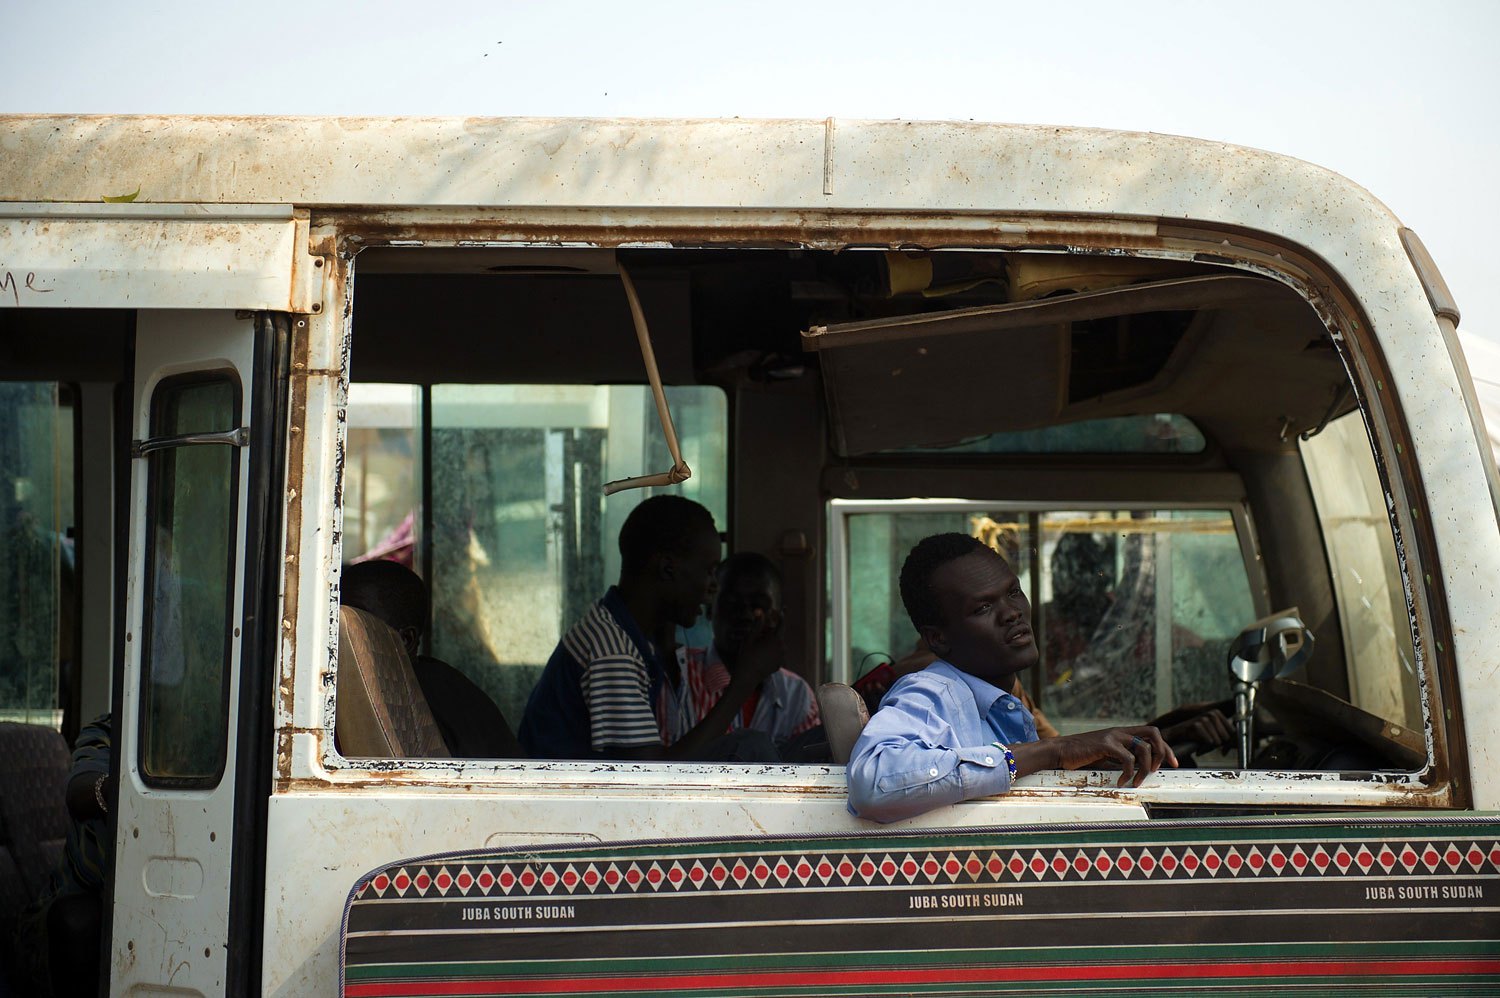 A South Sudanese man sits in the shell of an old bus in a spontaneous camp for internally displaced persons at the United Nations Mission to South Sudan base in Juba, South Sudan, on Jan. 9, 2014.